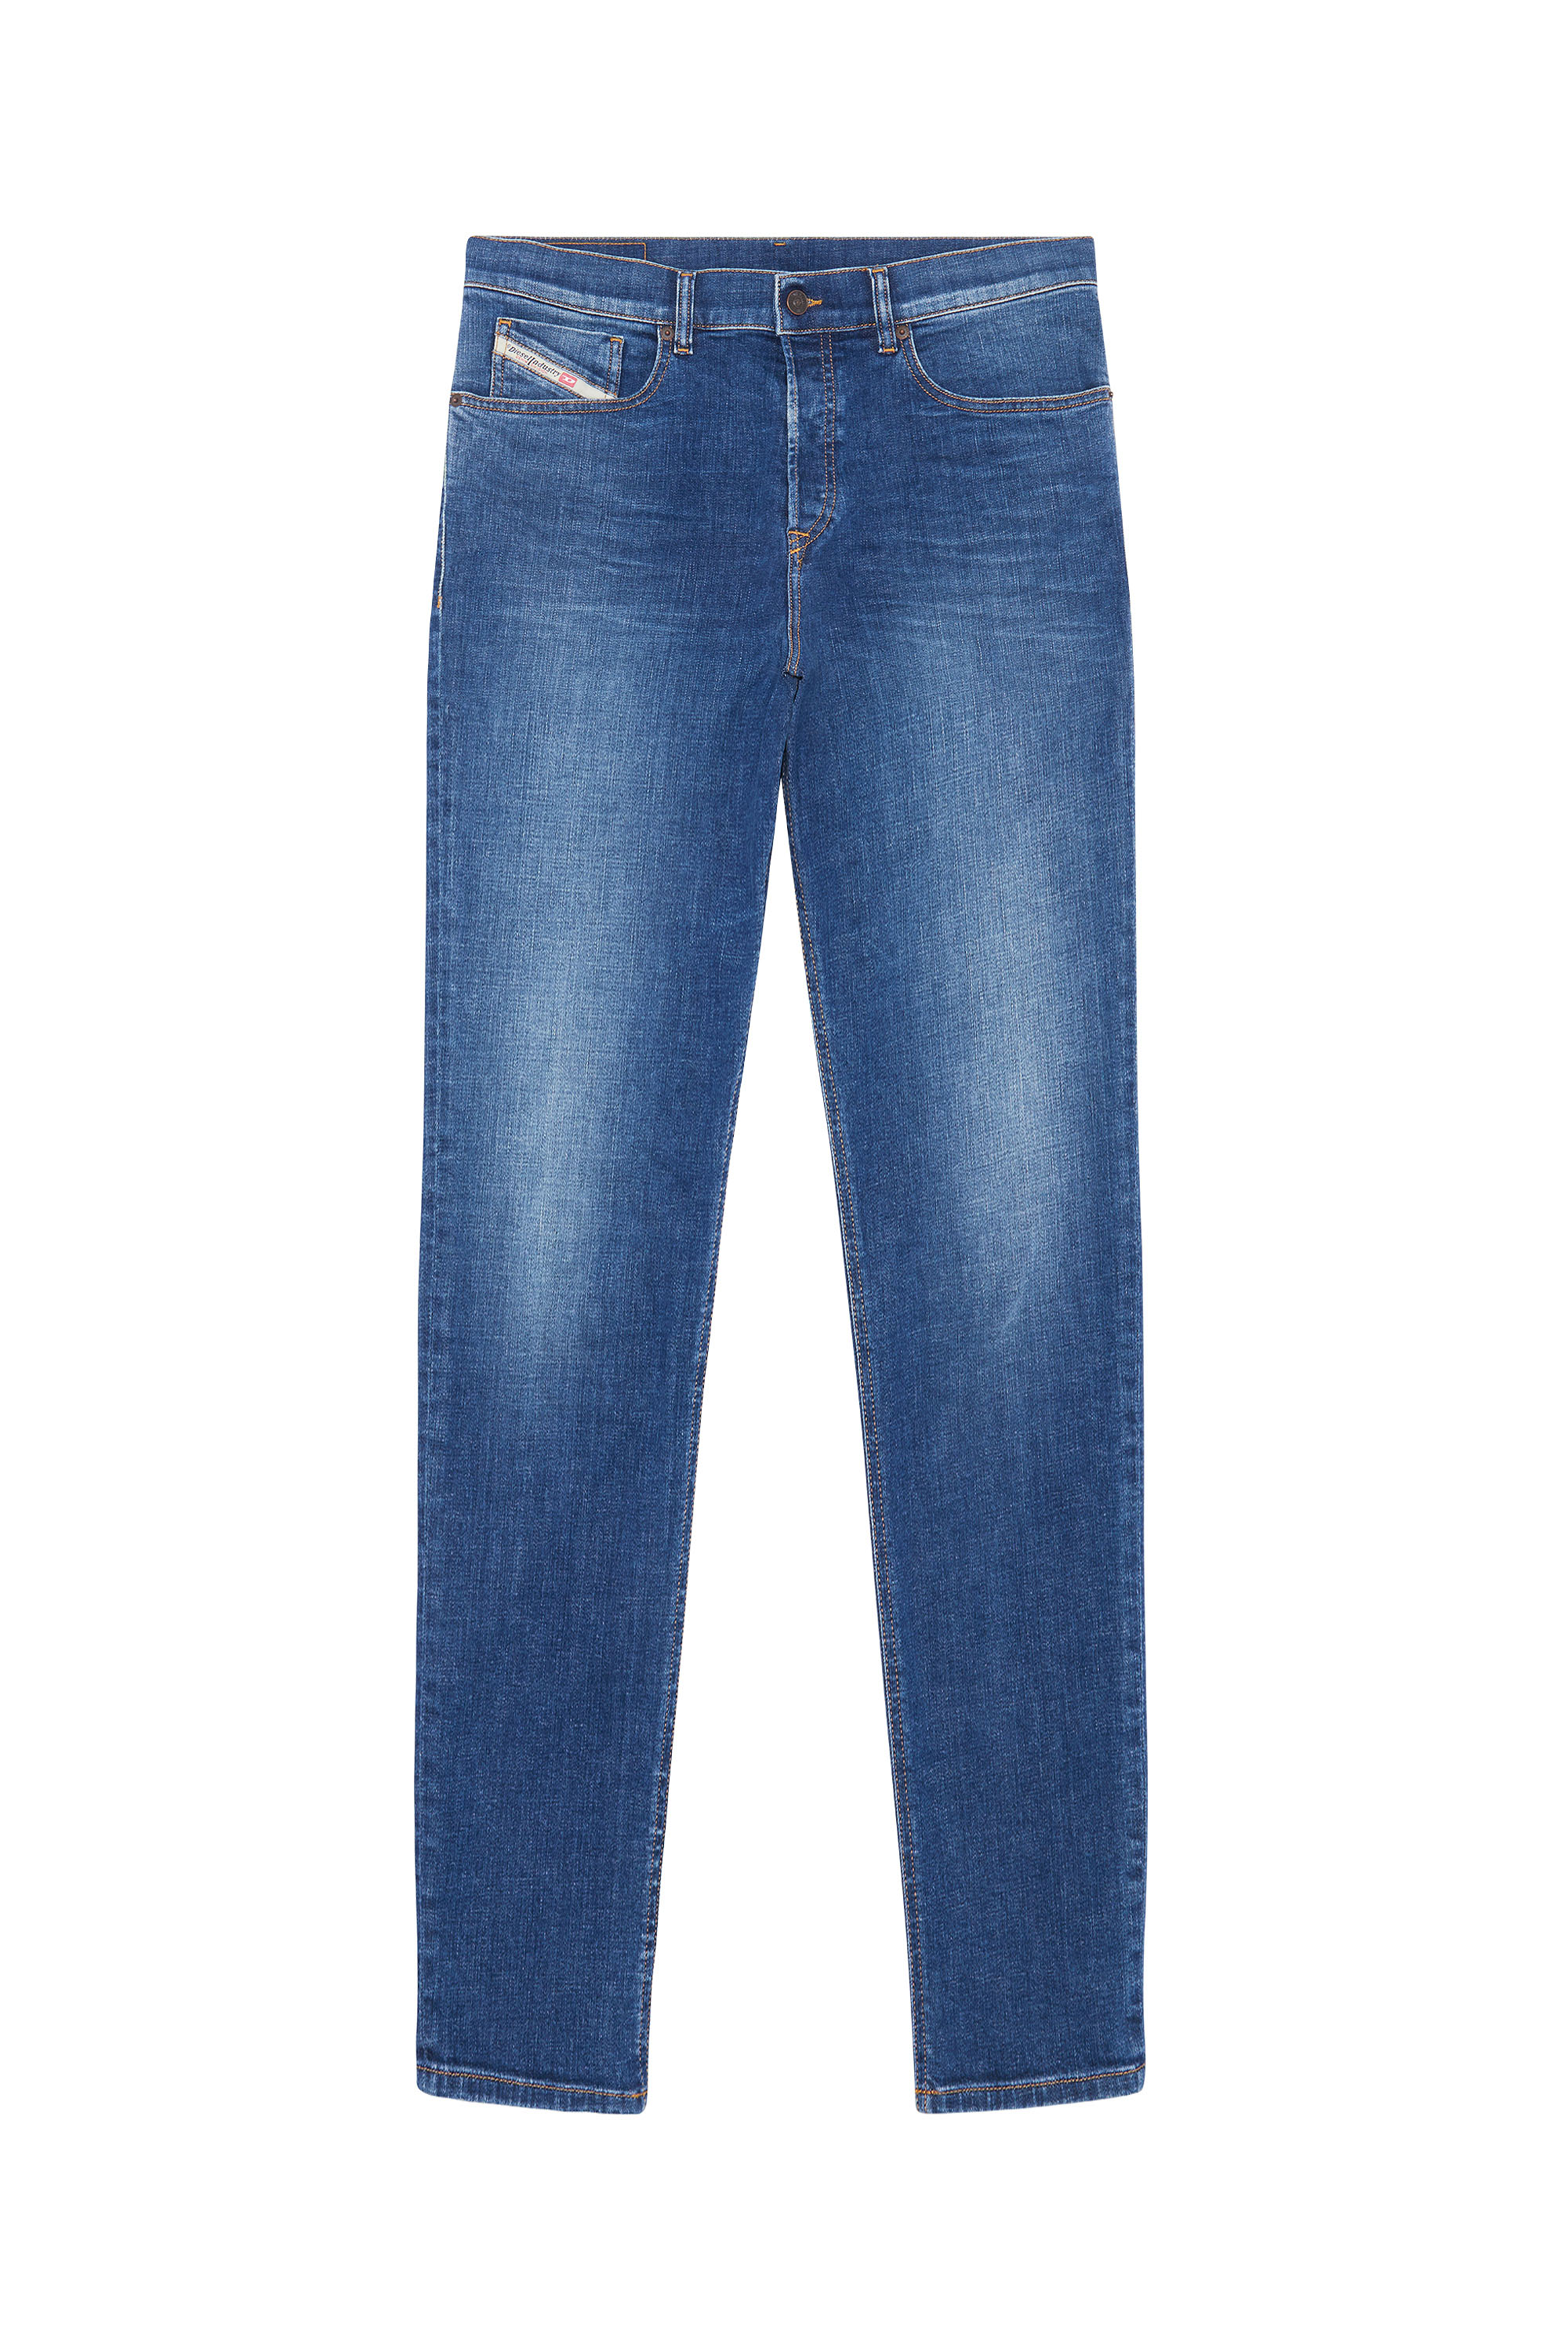 2005 D-FINING 09D46 Tapered Jeans, Dunkelblau - Jeans